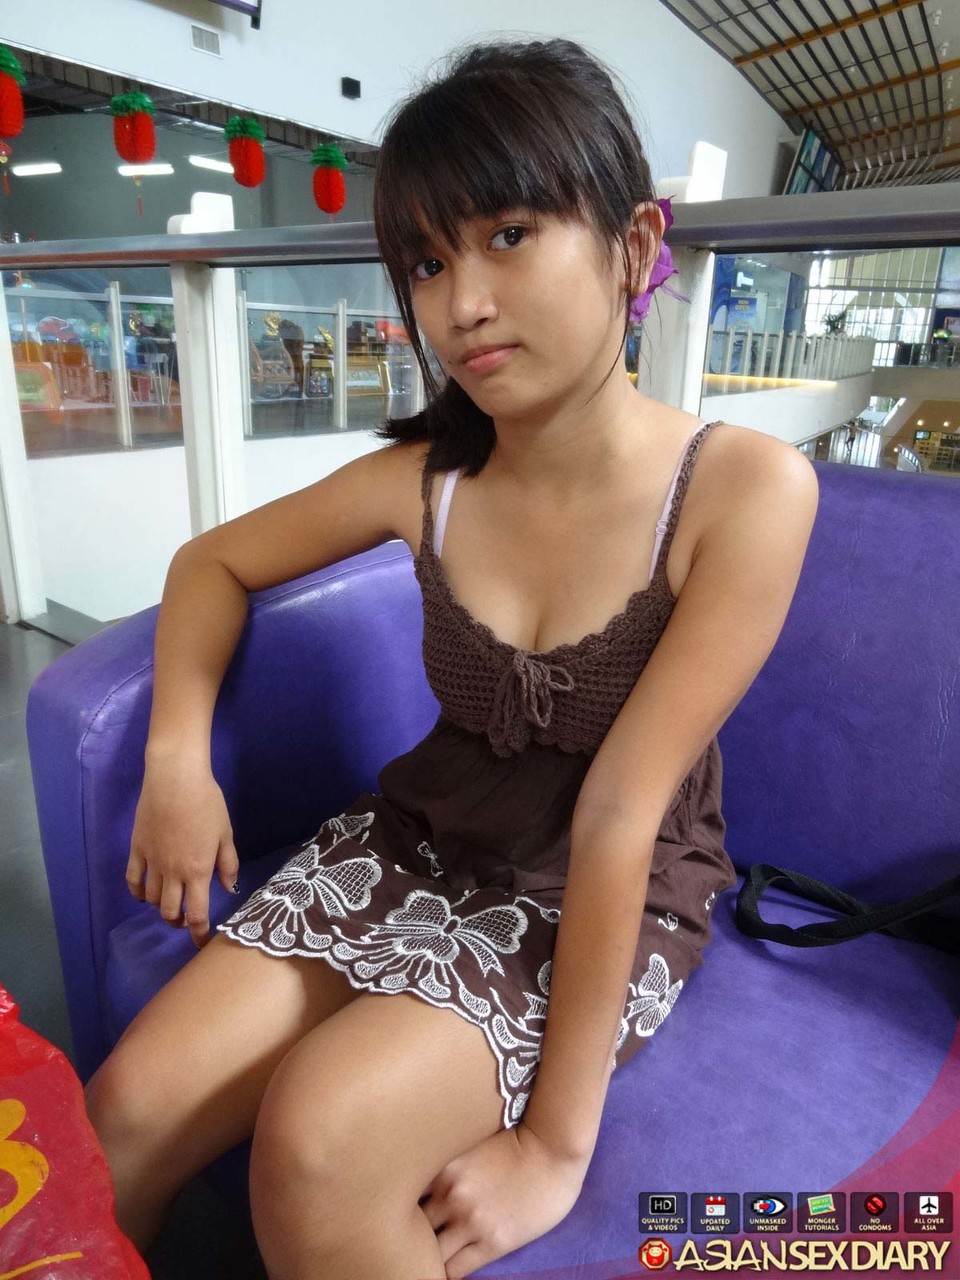 Petite Asian girl Menchie gets naked before having POV sexual relations 色情照片 #422641351 | Asian Sex Diary Pics, Menchie, Asian, 手机色情